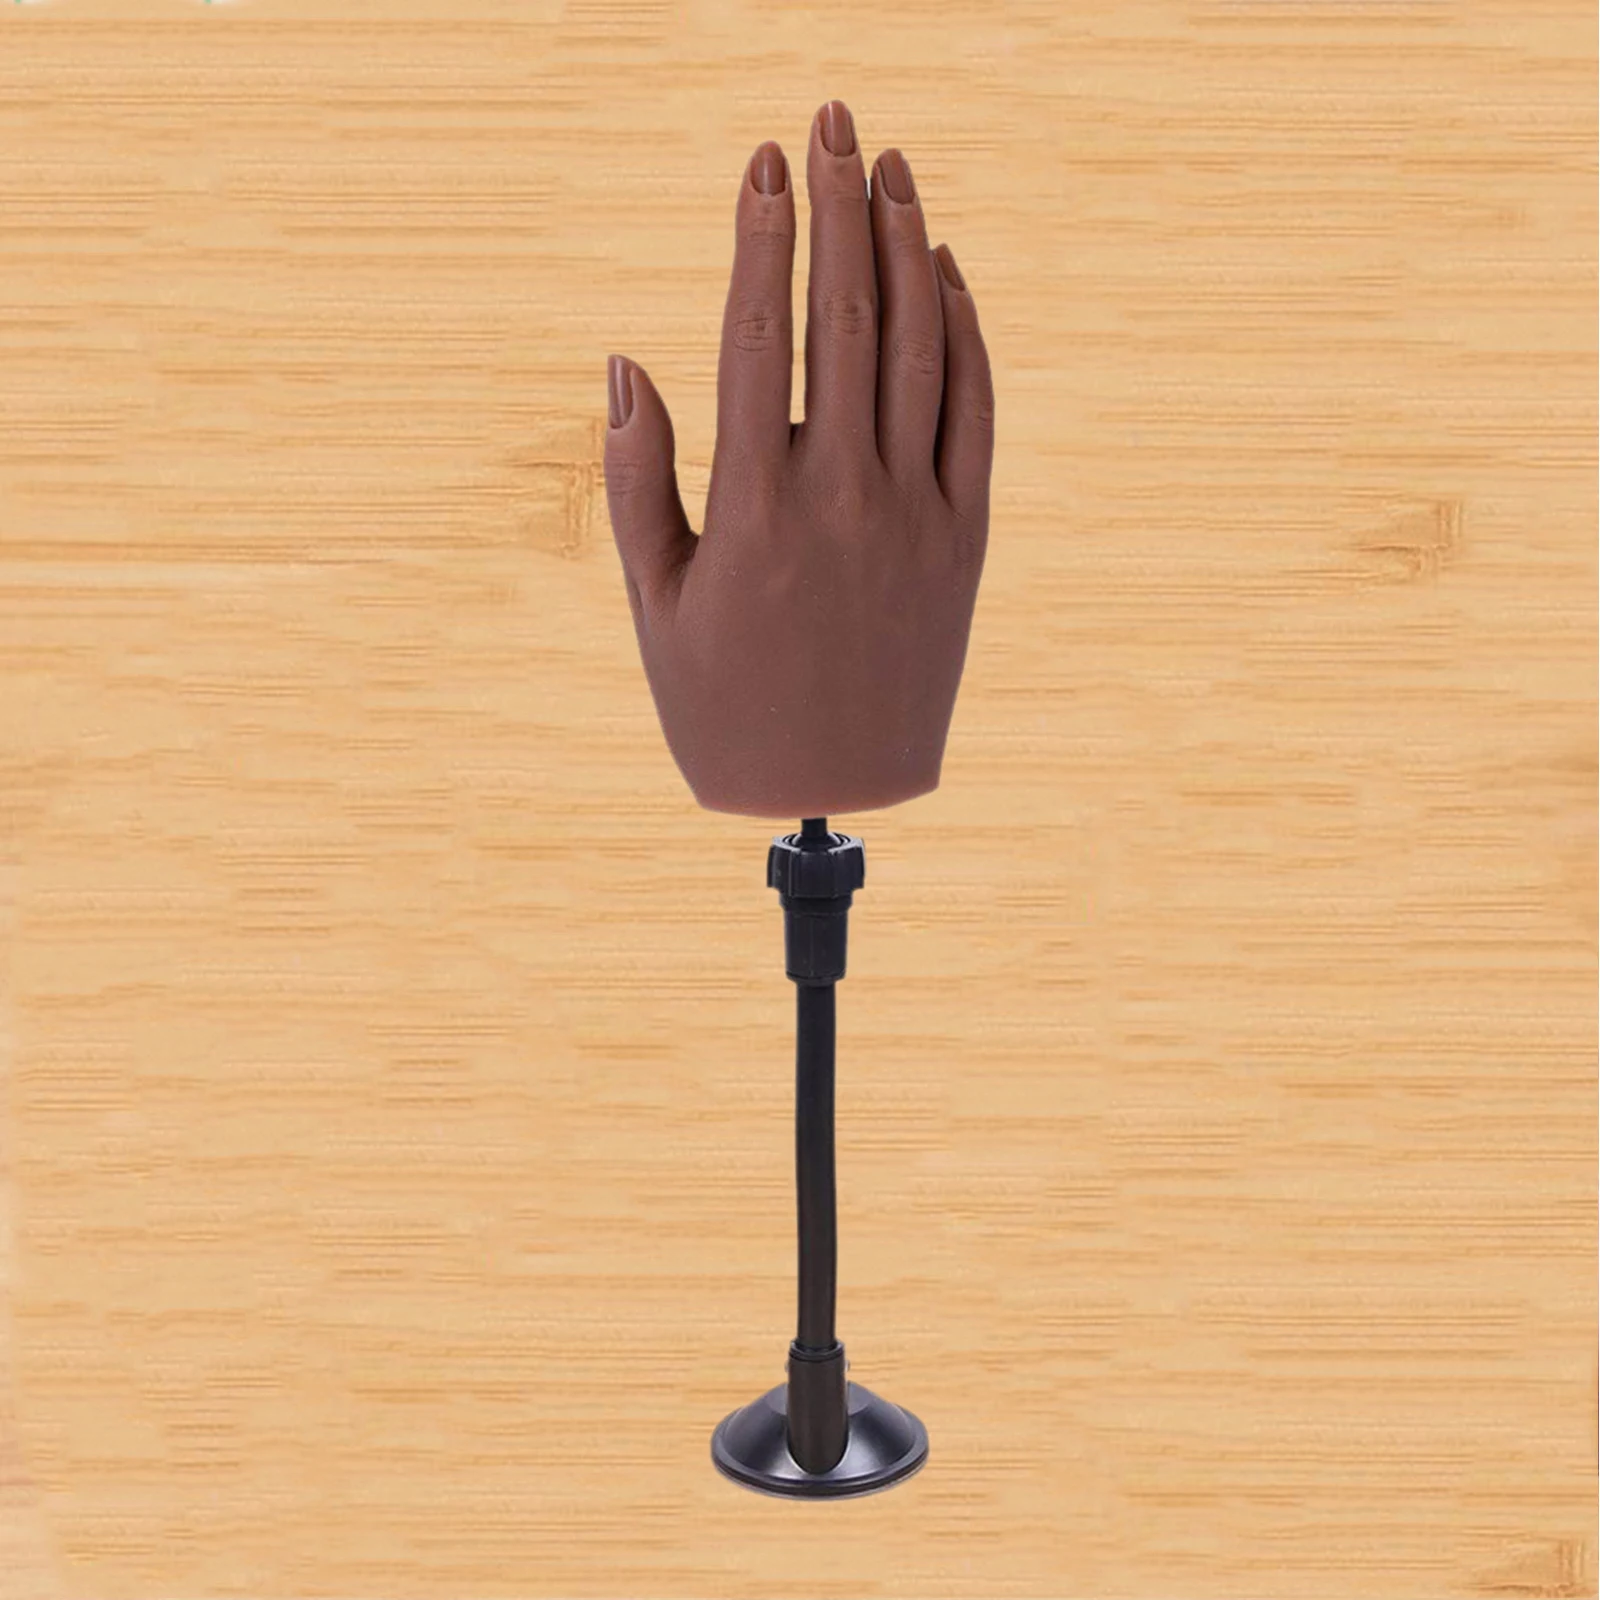 Silicone Practice Hand for Acrylic Nails Nail Art Training Hand Flexible Movable Finger Fake Hand Manicure Practice Tool